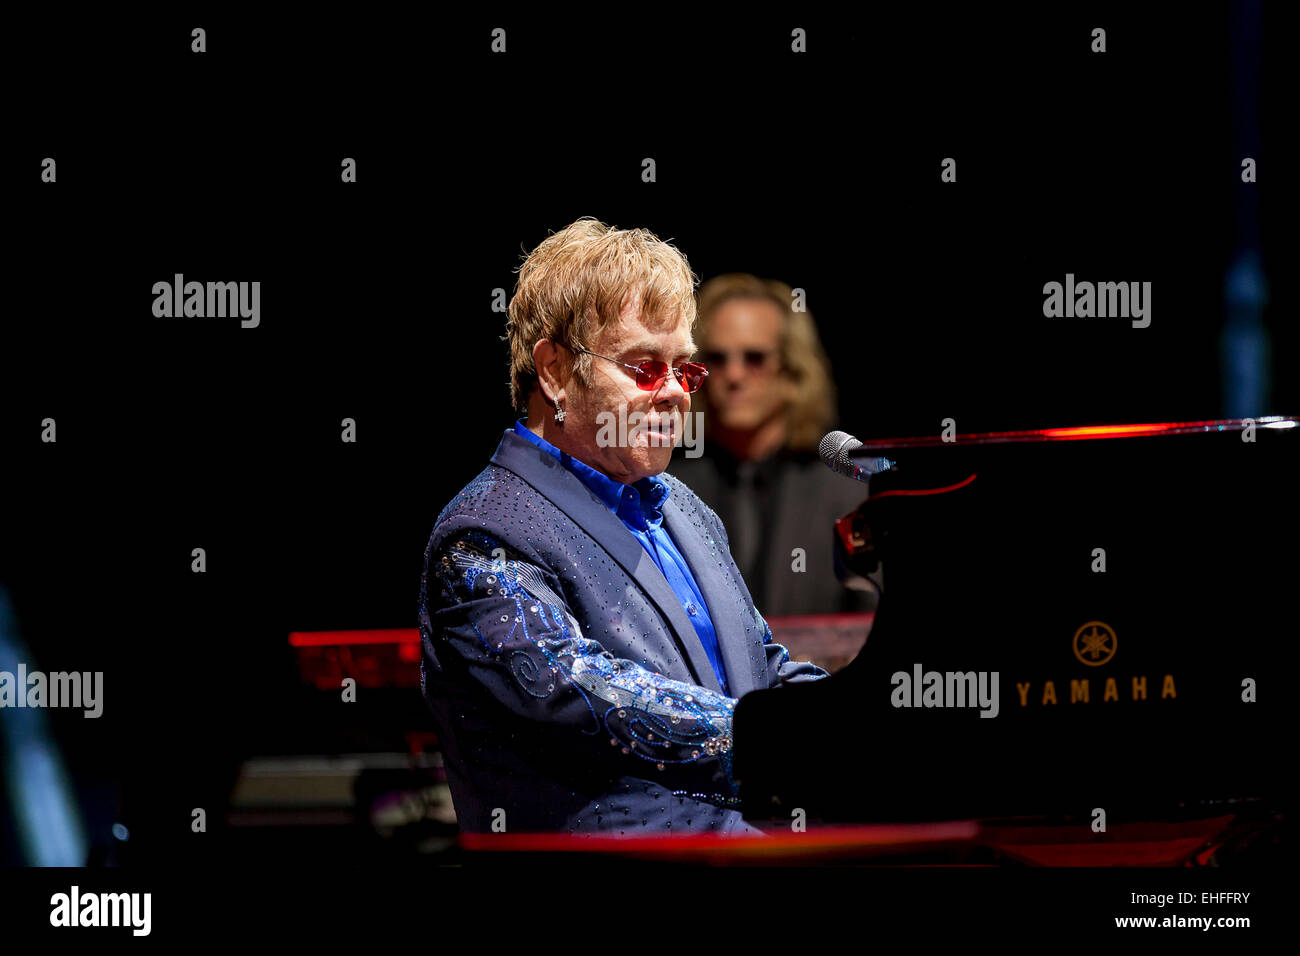 Elton John performing at Bestival on the Isle of Wight September 2013 Stock Photo